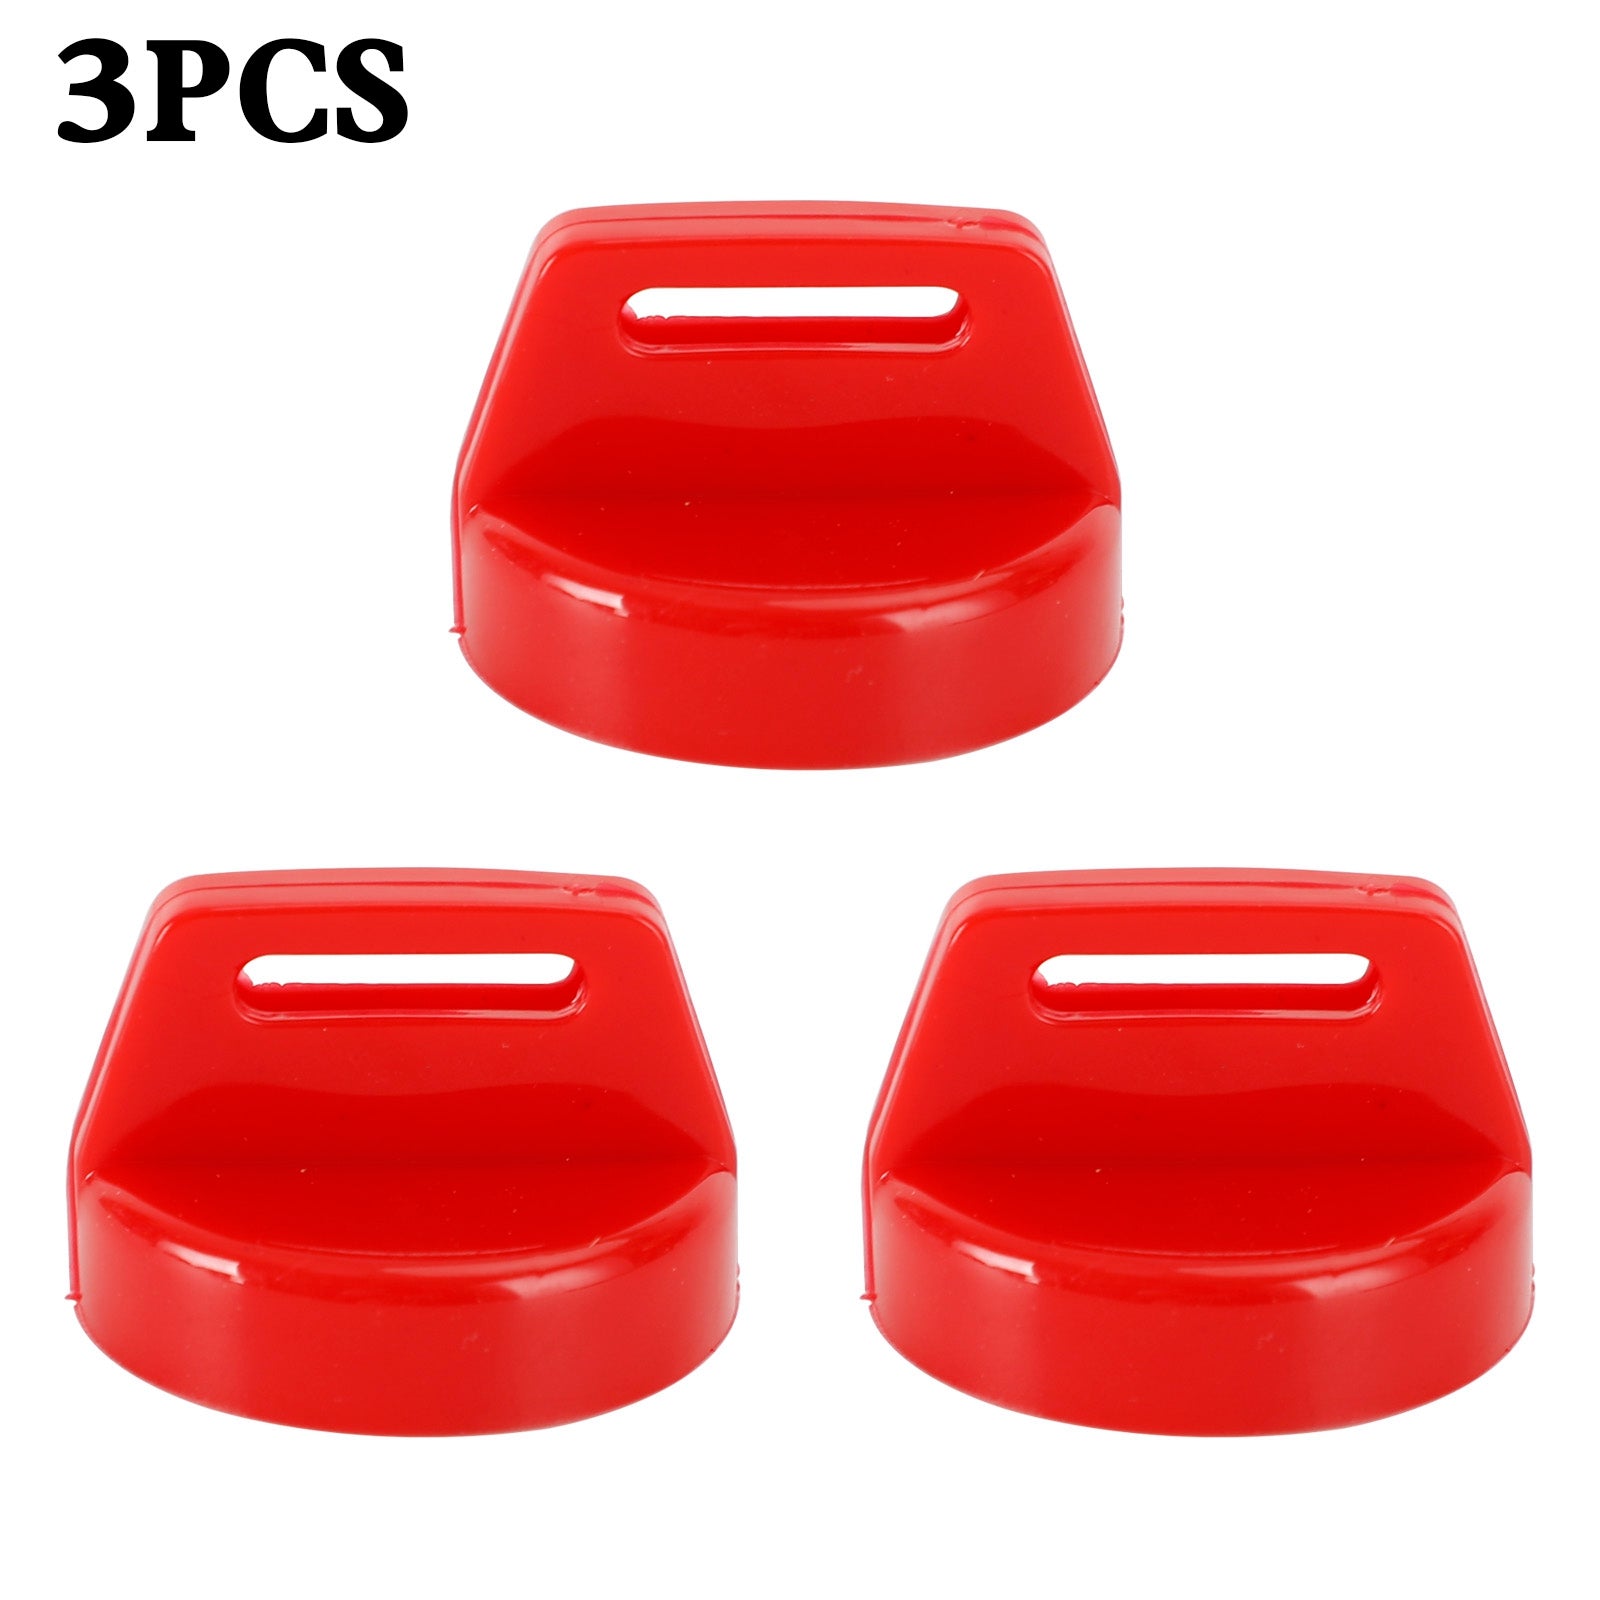 3 Pack Key Switch Cover Red For Polaris 5433534 Sportsman Scrambler Magnum Generic